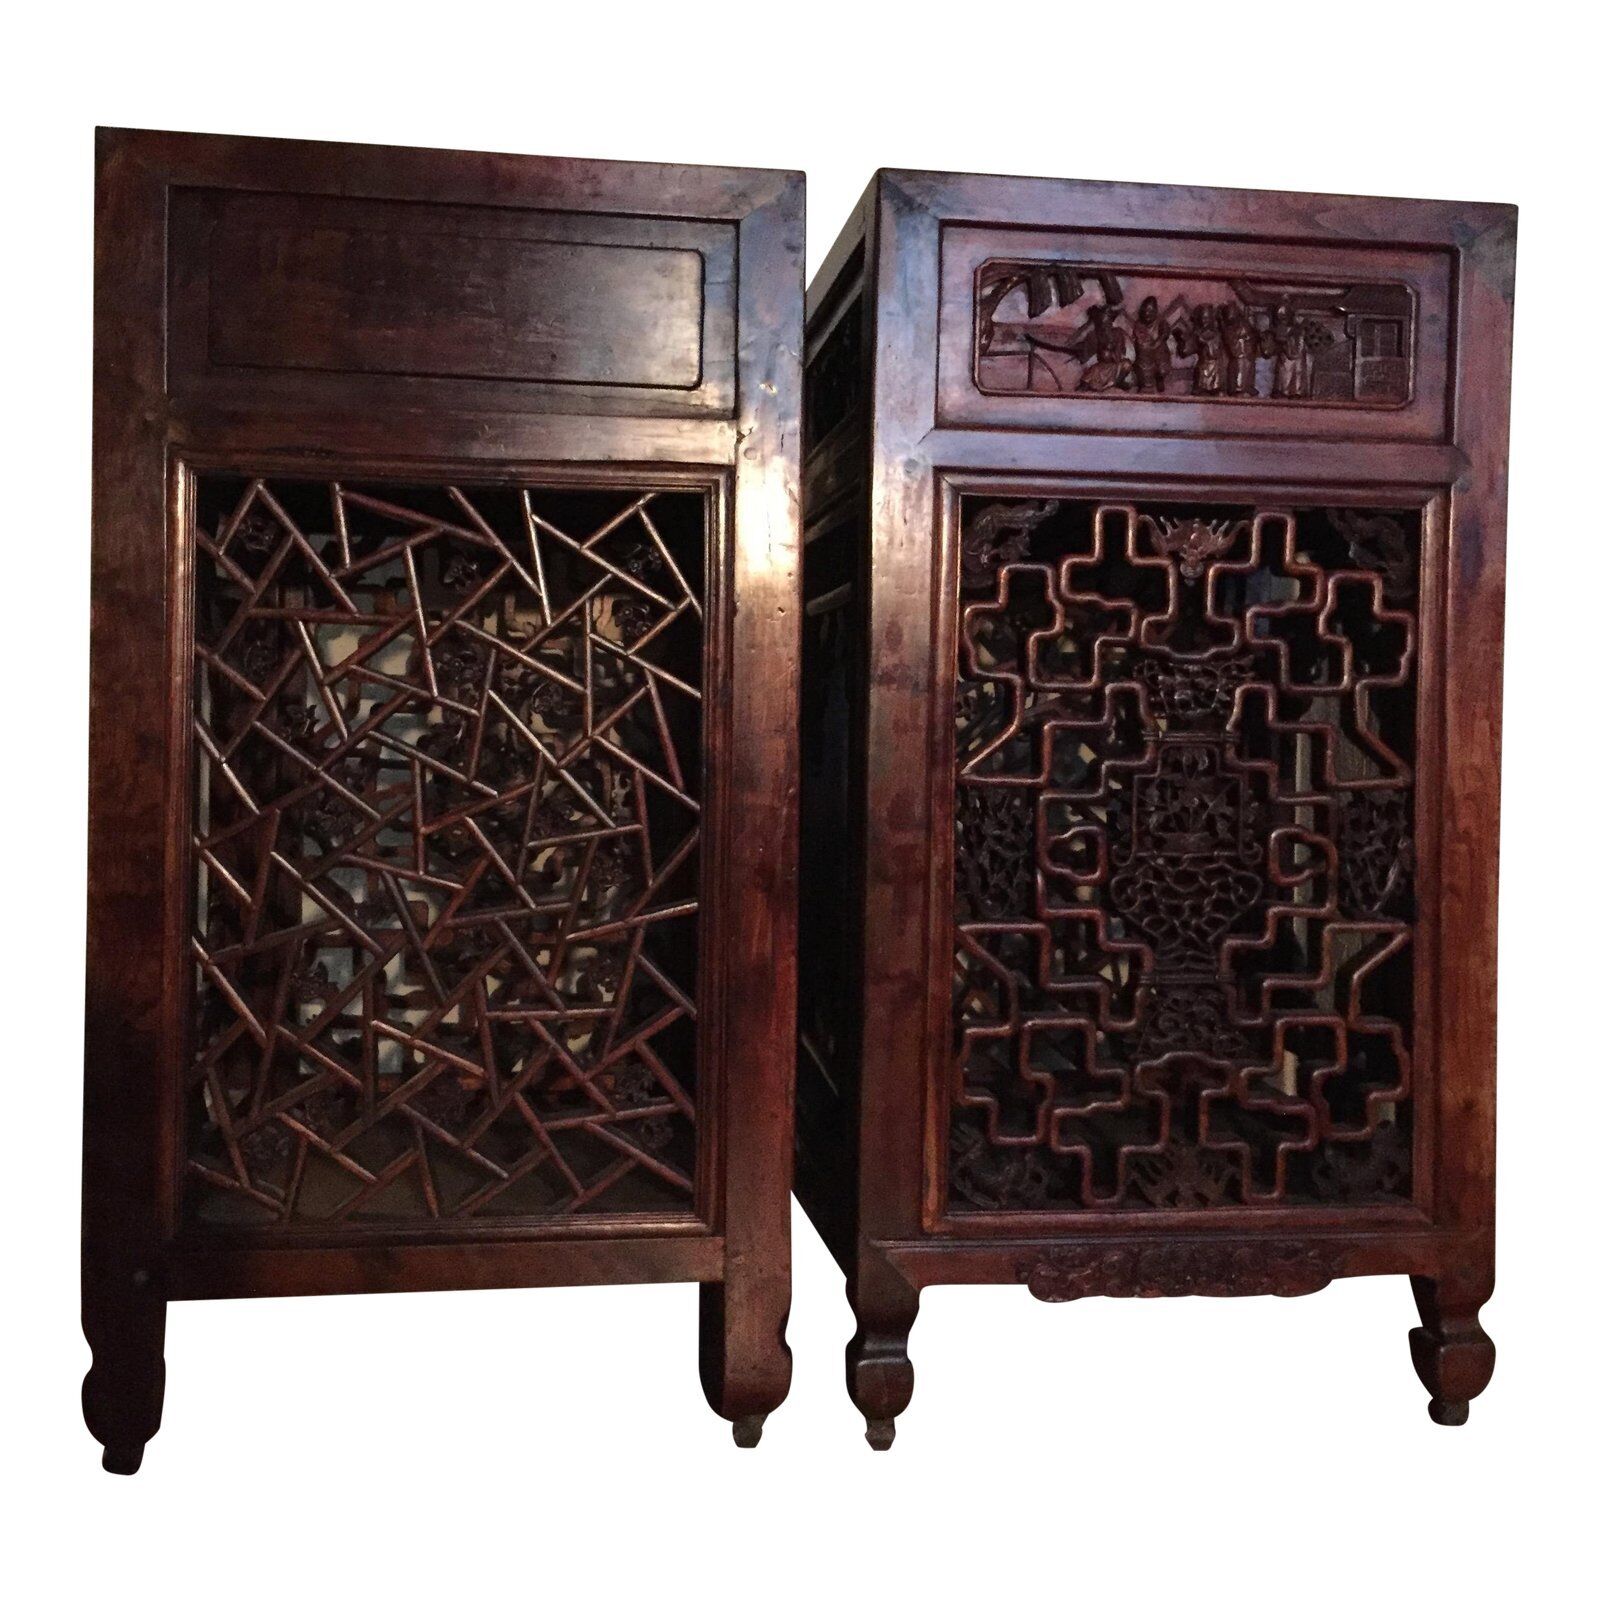 Antique Carved Chinese Side Tables, Qing Period, circa 1870 - a Pair Без бренда